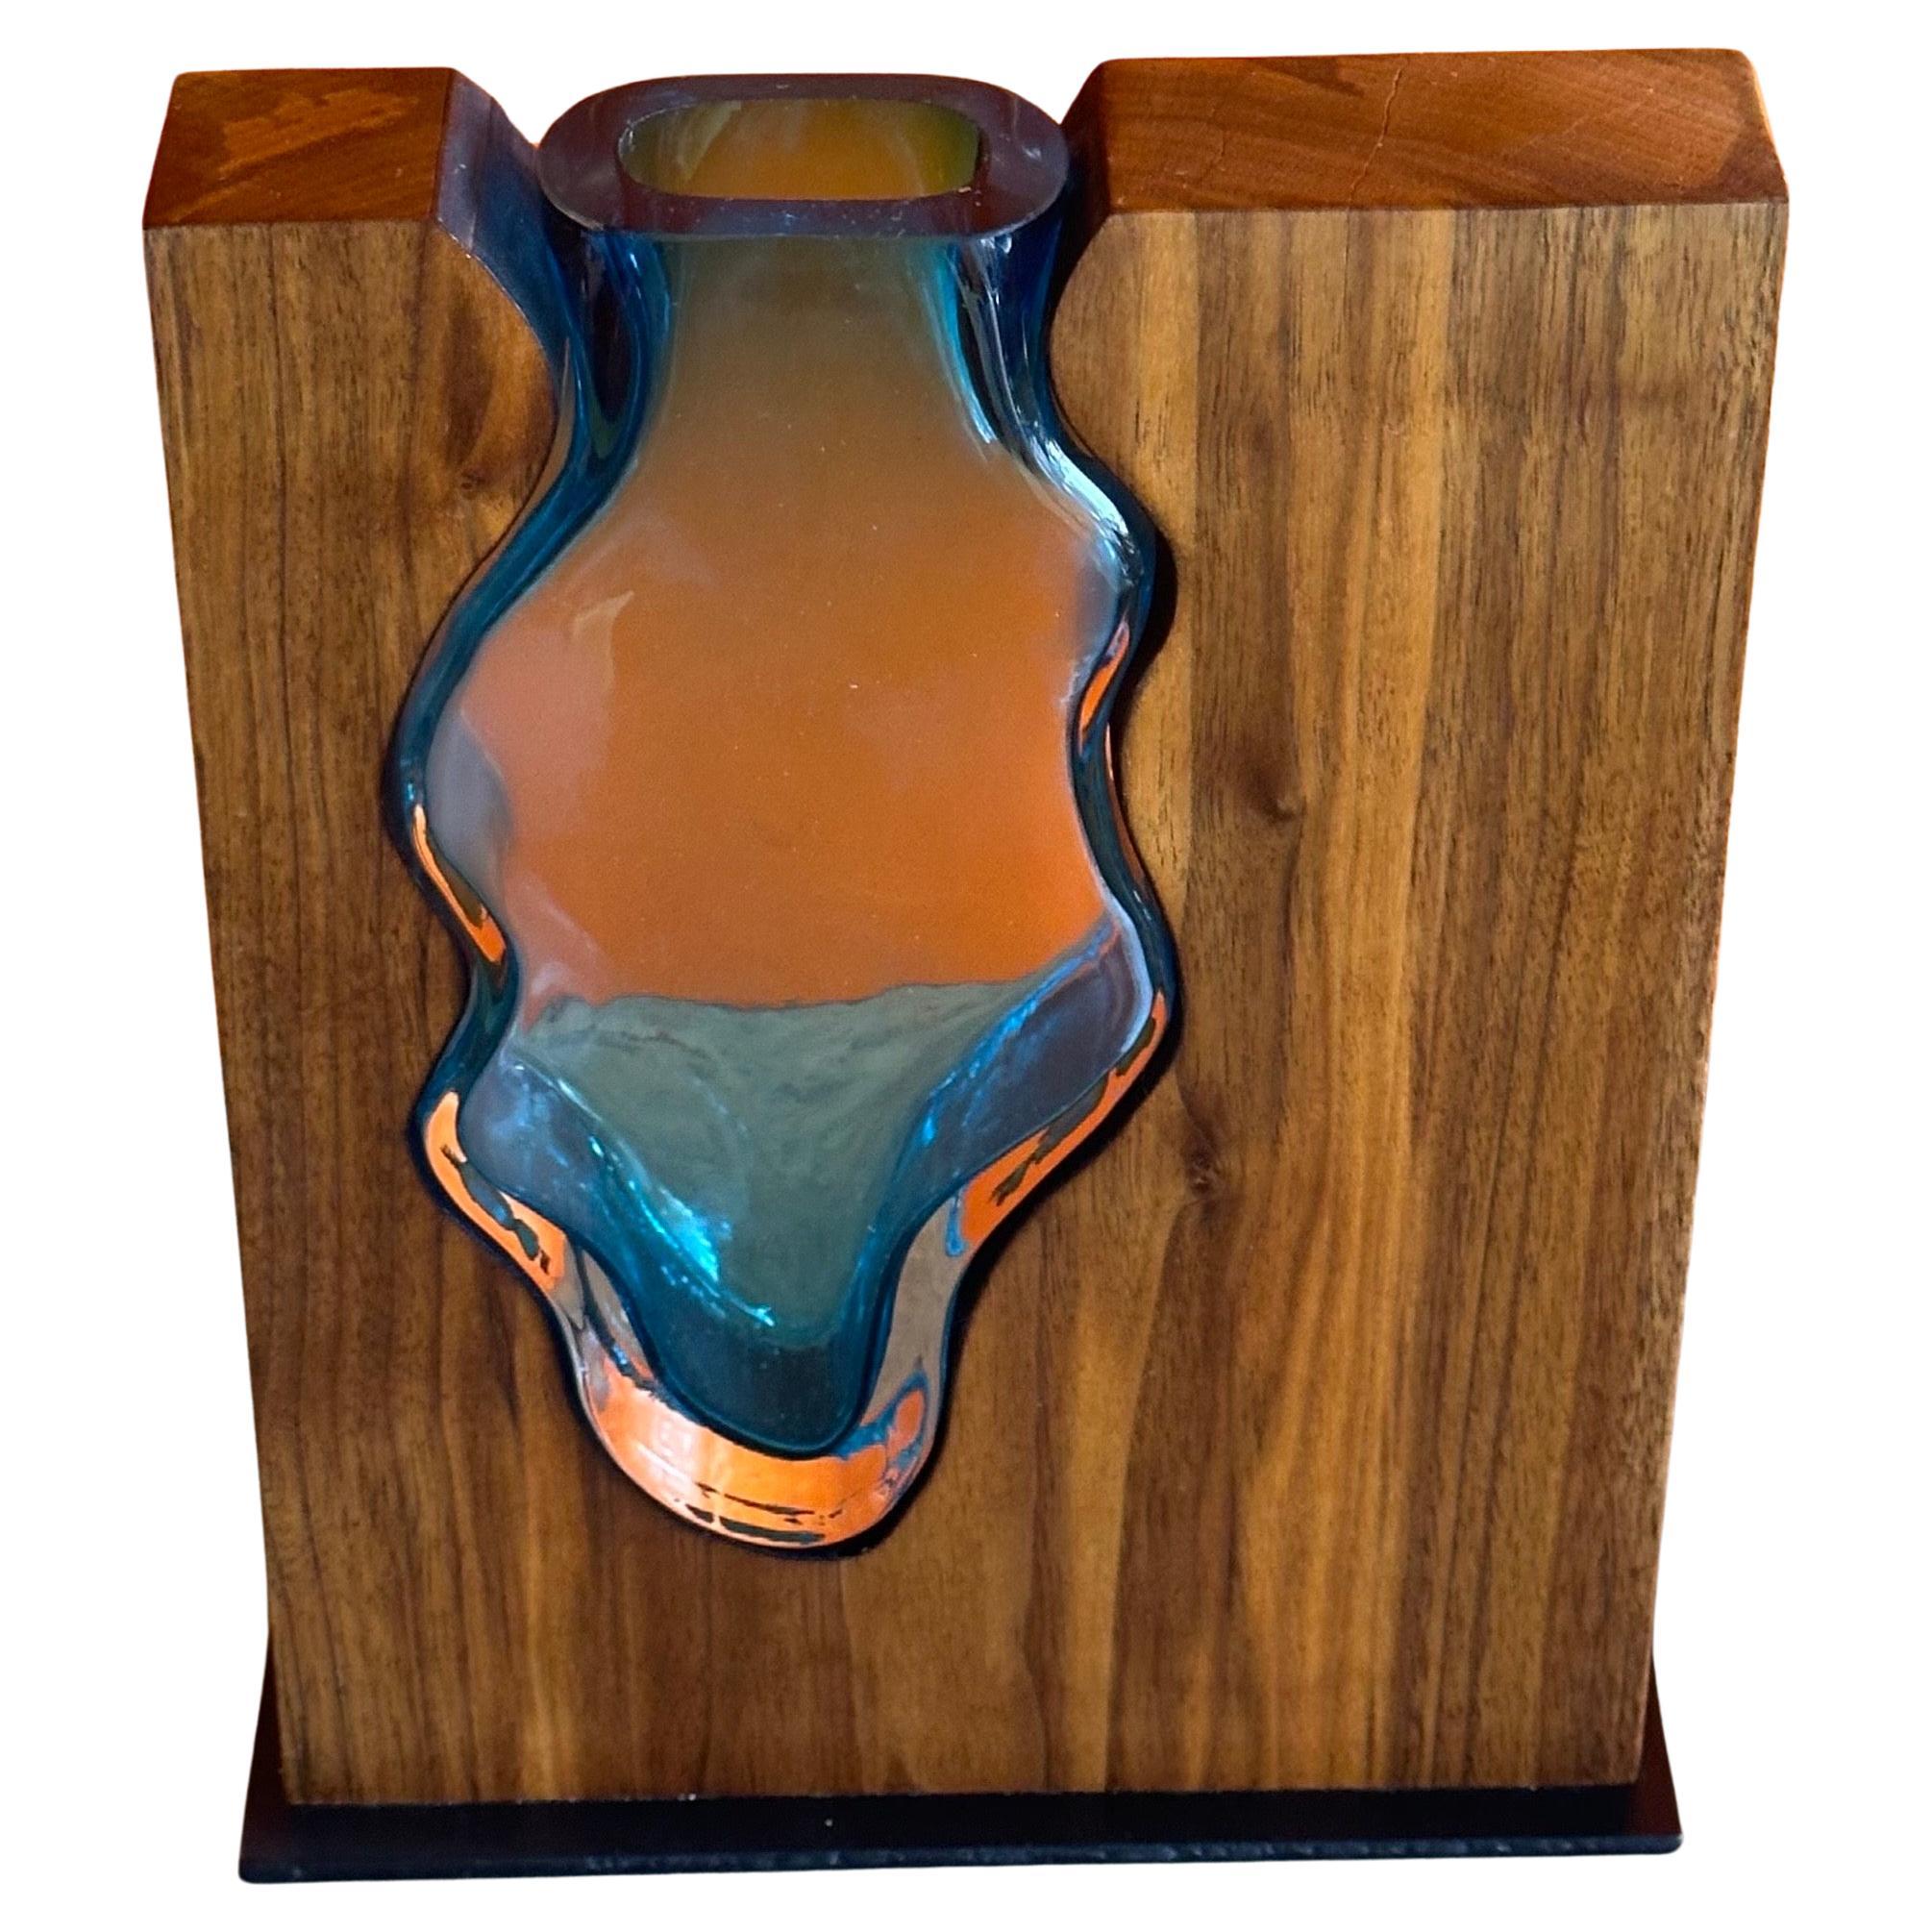 An absolutely gorgeous walnut and emerald art glass vase by Scott Slagerman, circa 2022.  The simple and elegant vase is hand crafted by fitting a custom blown art glass vase into a block of walnut wood.  The piece is in like new condition and